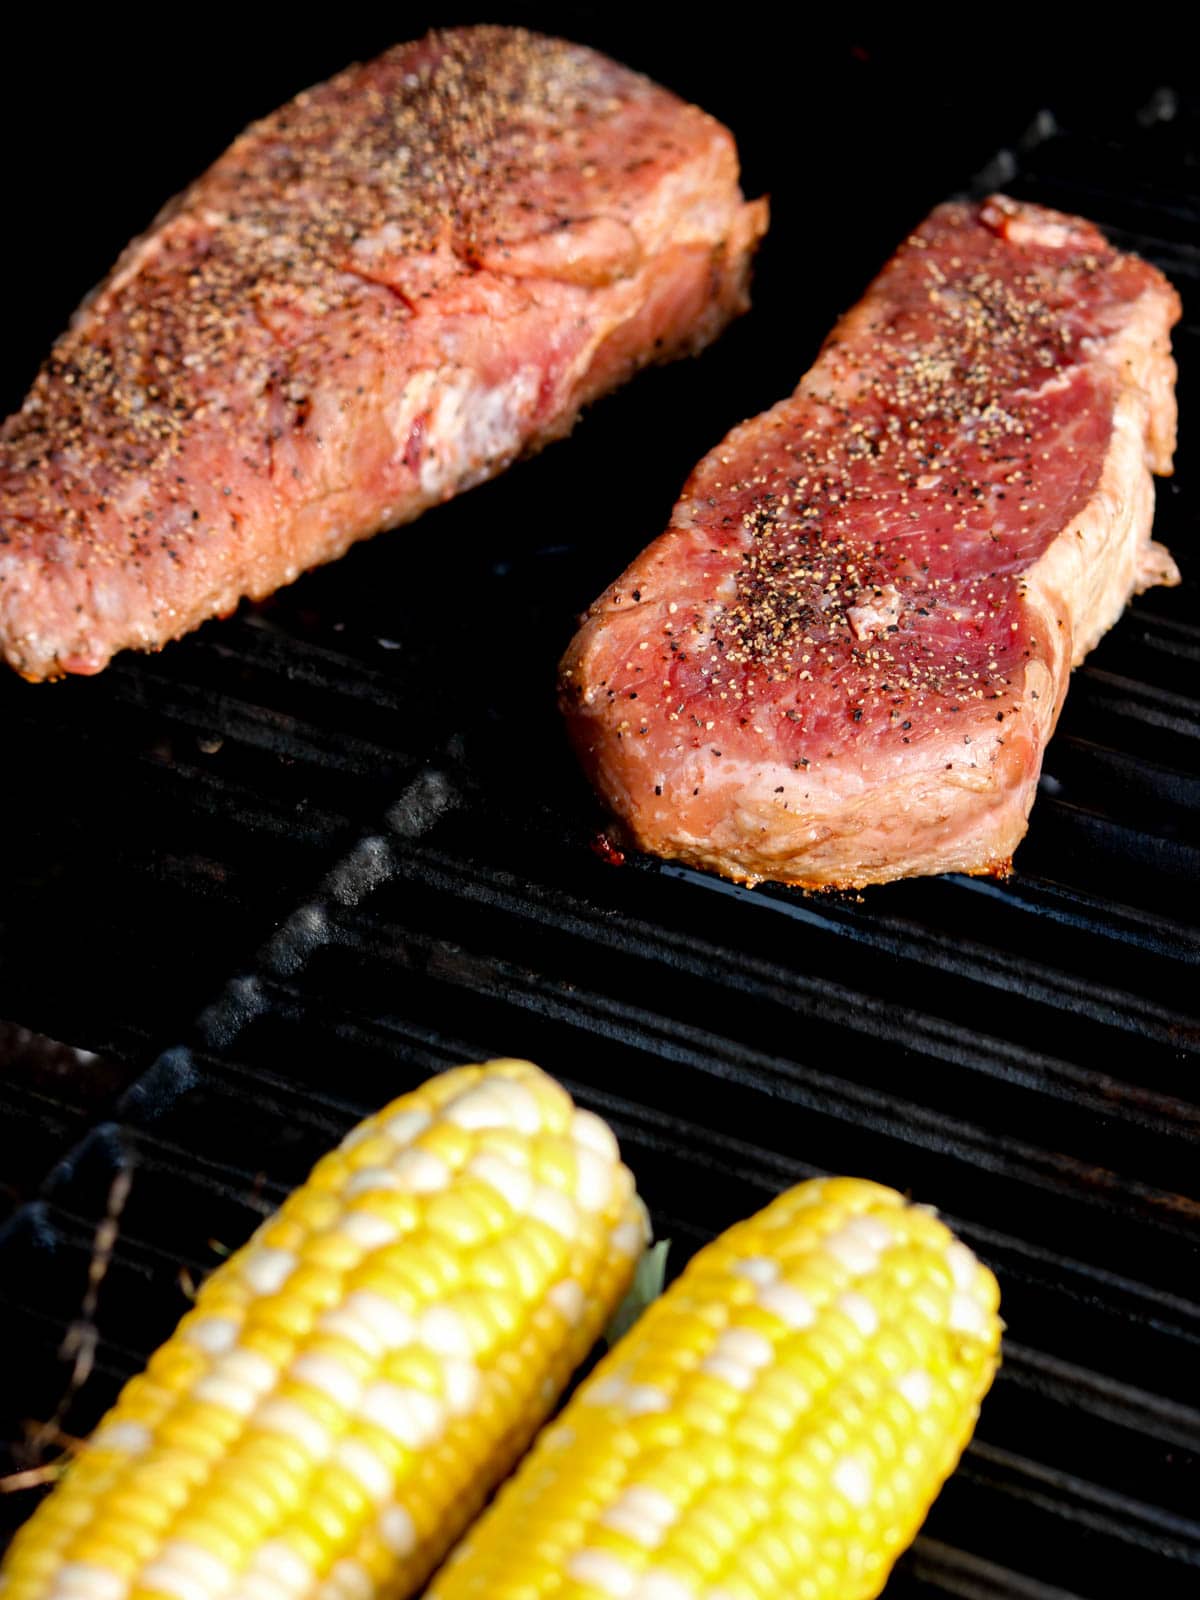 uncooked steak on a grill.